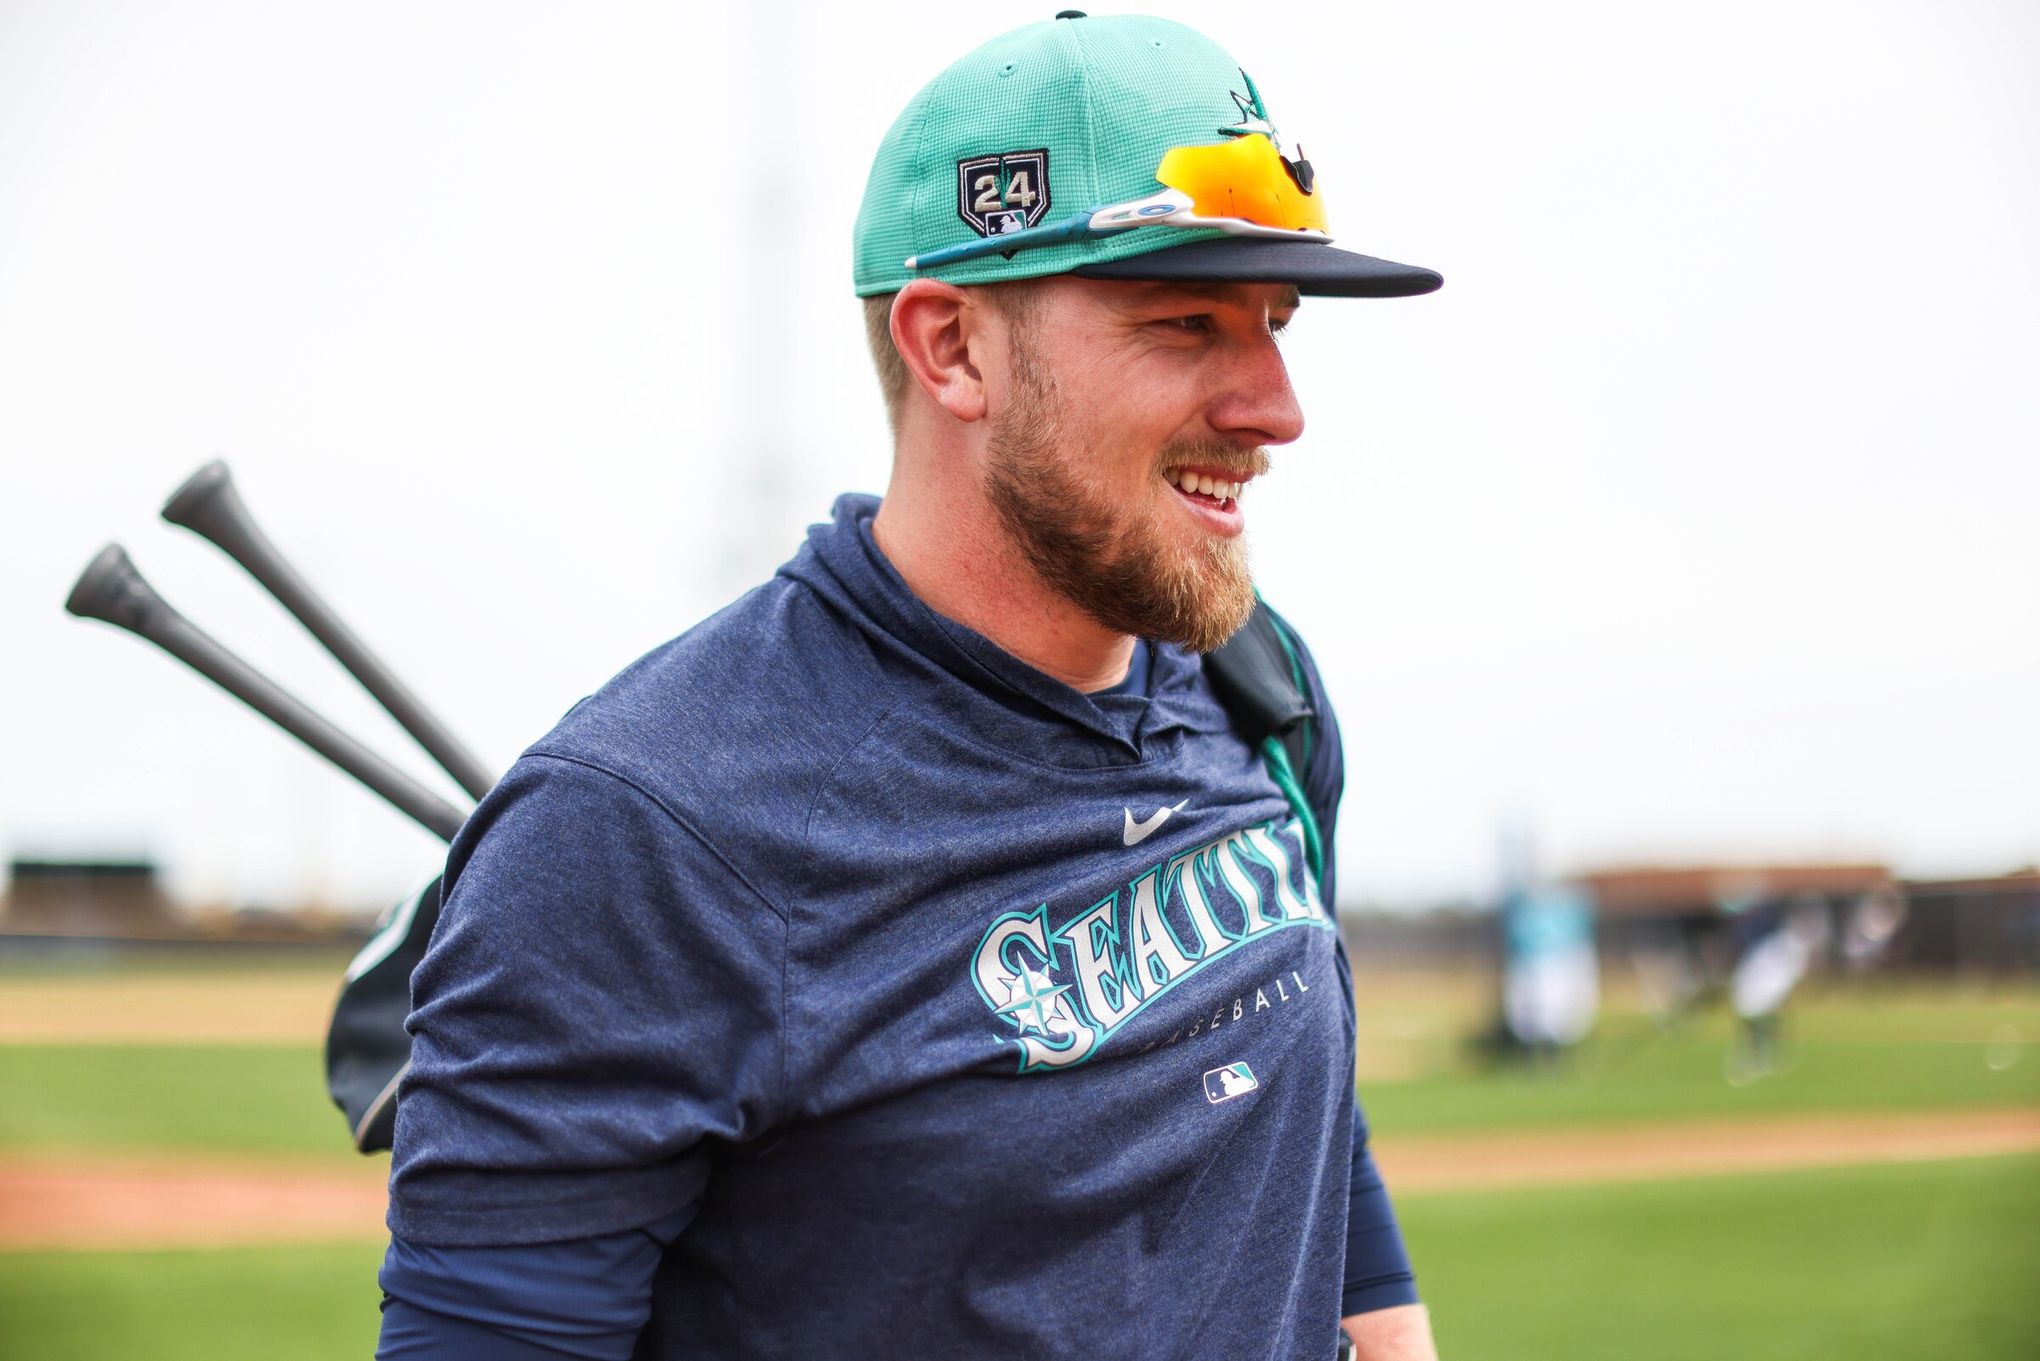 Just as opening day nears, Luke Raley starting to heat up for Mariners |  The Seattle Times